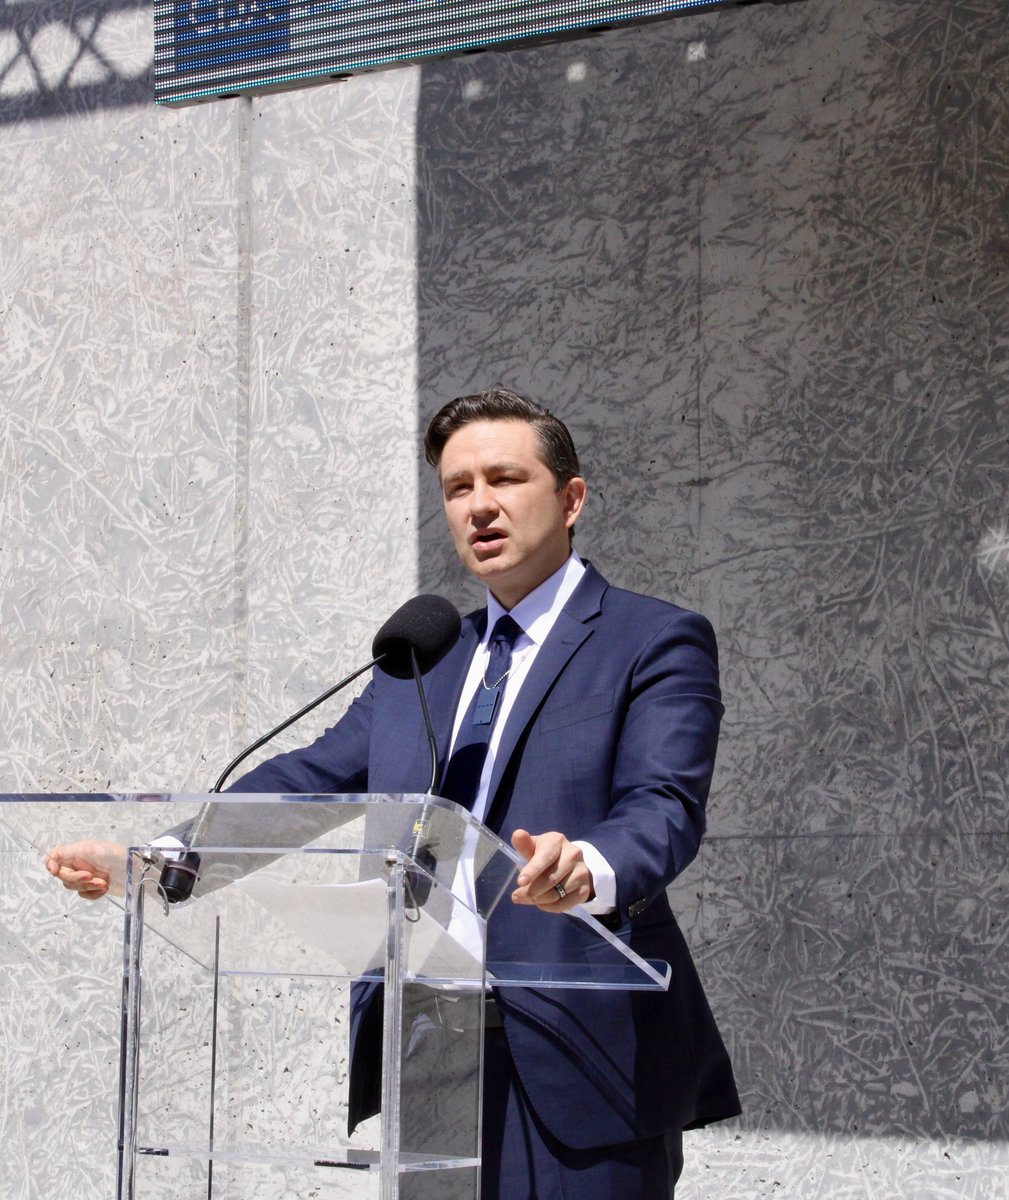 Ambassador @AmbVassSalazar joined the Jewish community, @JustinTrudeau, @PierrePoilievre, Ministers, MPs & Ambassadors at a deeply moving #YomHaShoah commemoration at the National Holocaust Monument. We remember the #Holocaust and stand up against antisemitism. #NeverAgain